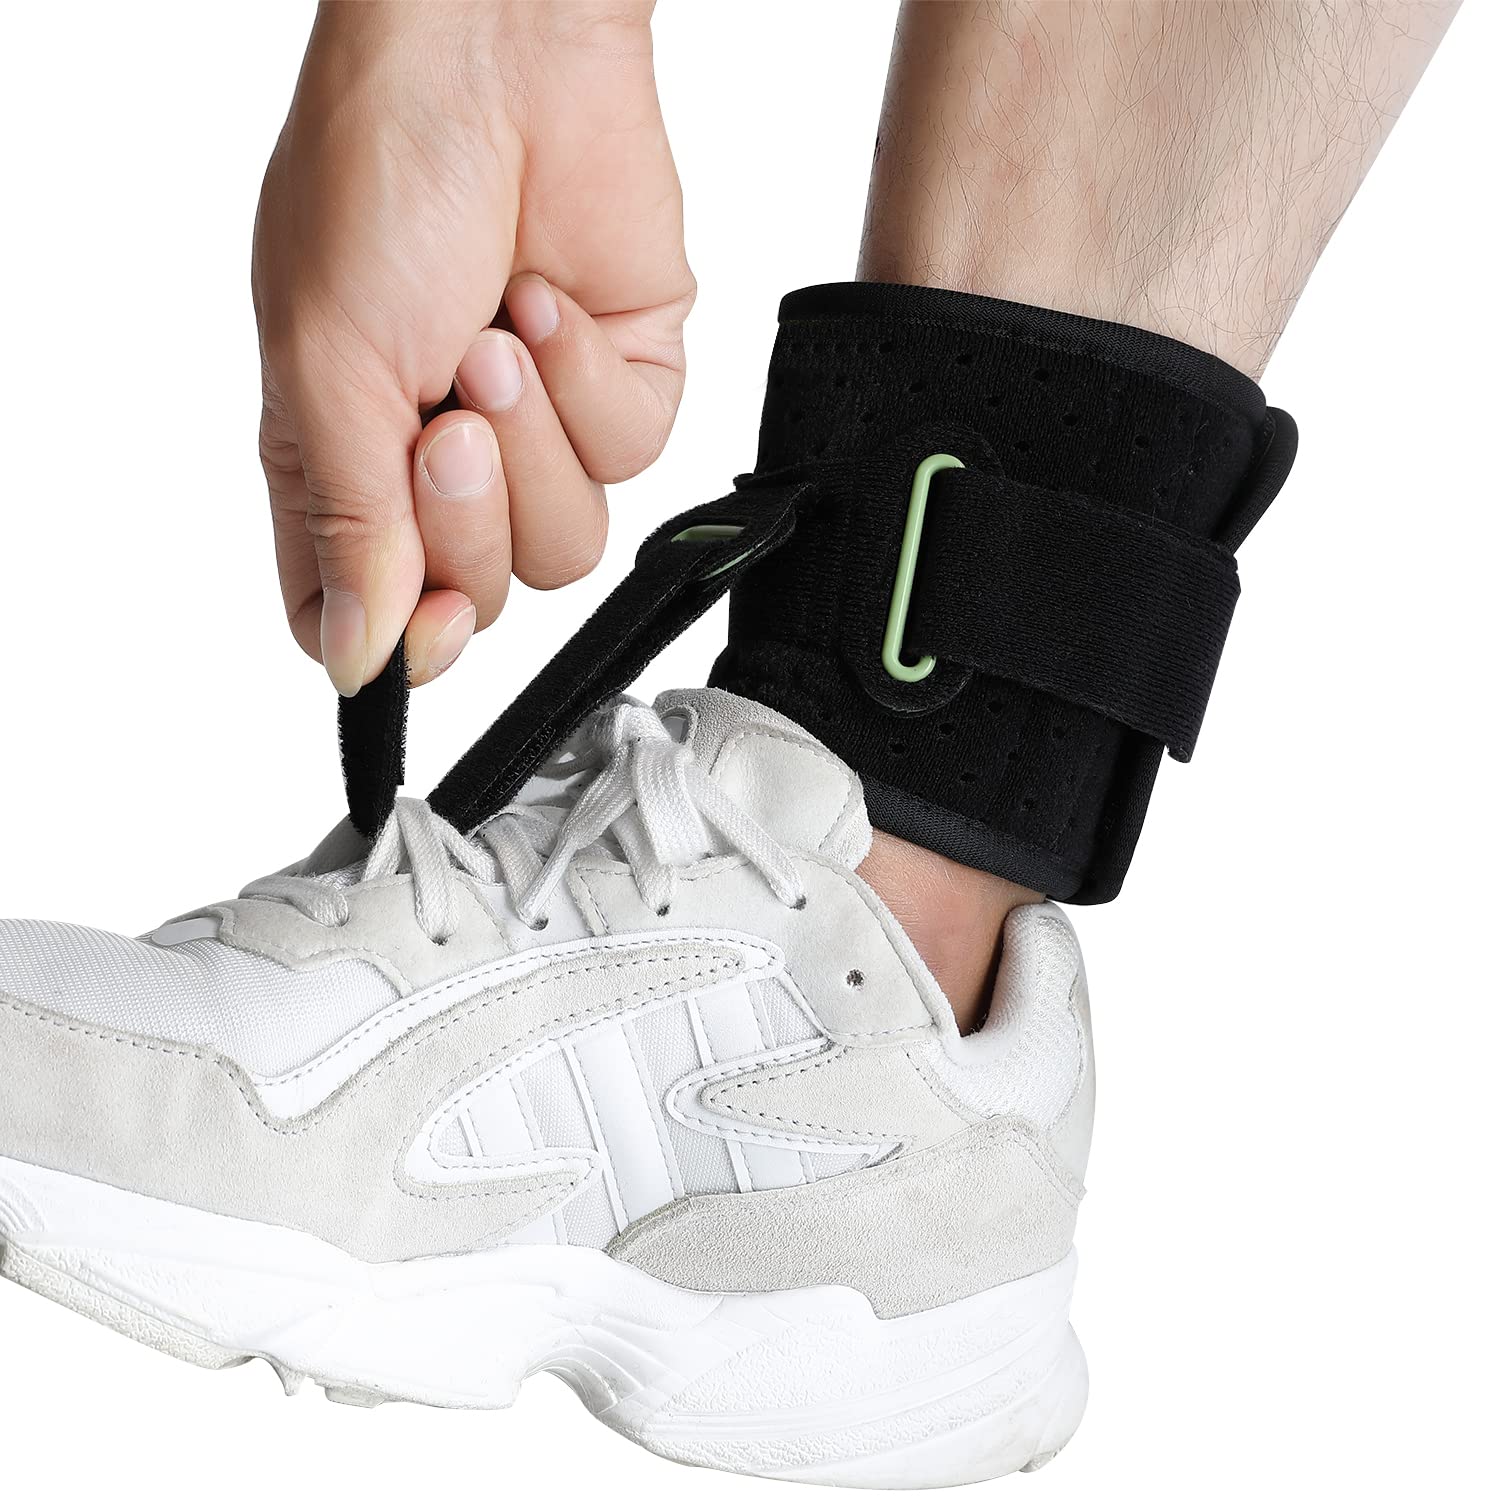 Adjustable Drop Foot Brace Foot Up Afo Brace Unisex Fits for Right